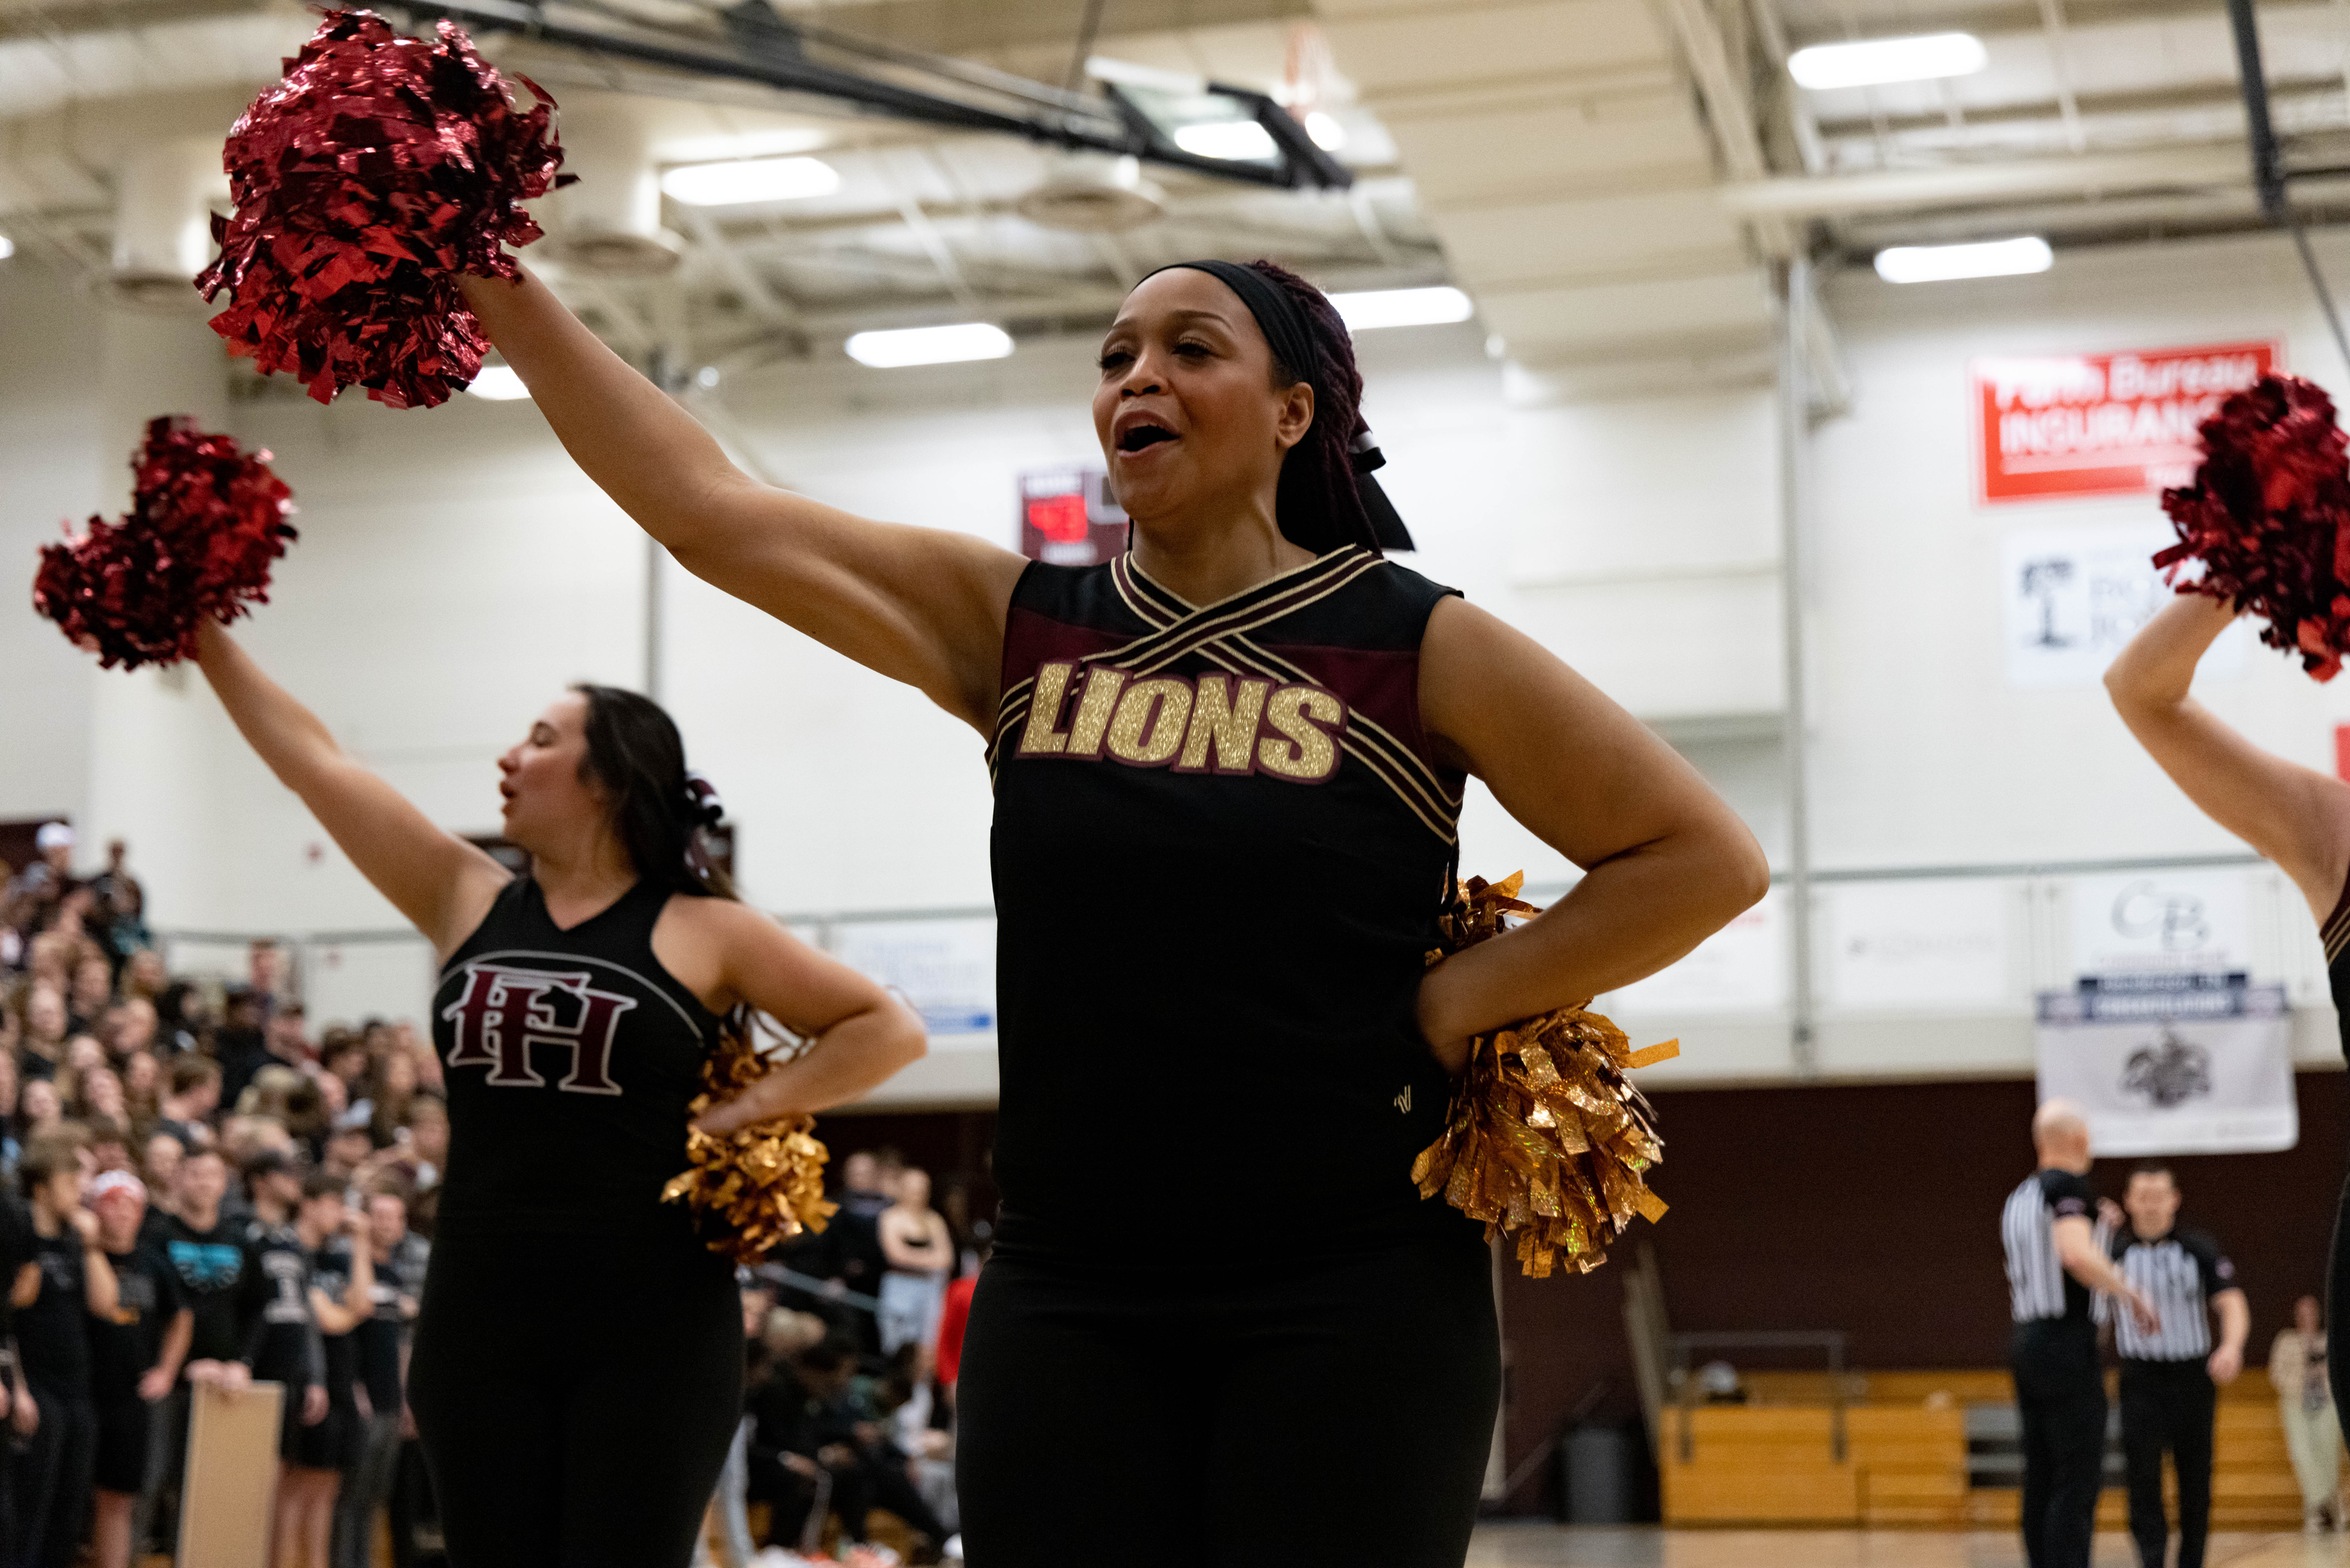 FHU cheer to hold open tryouts